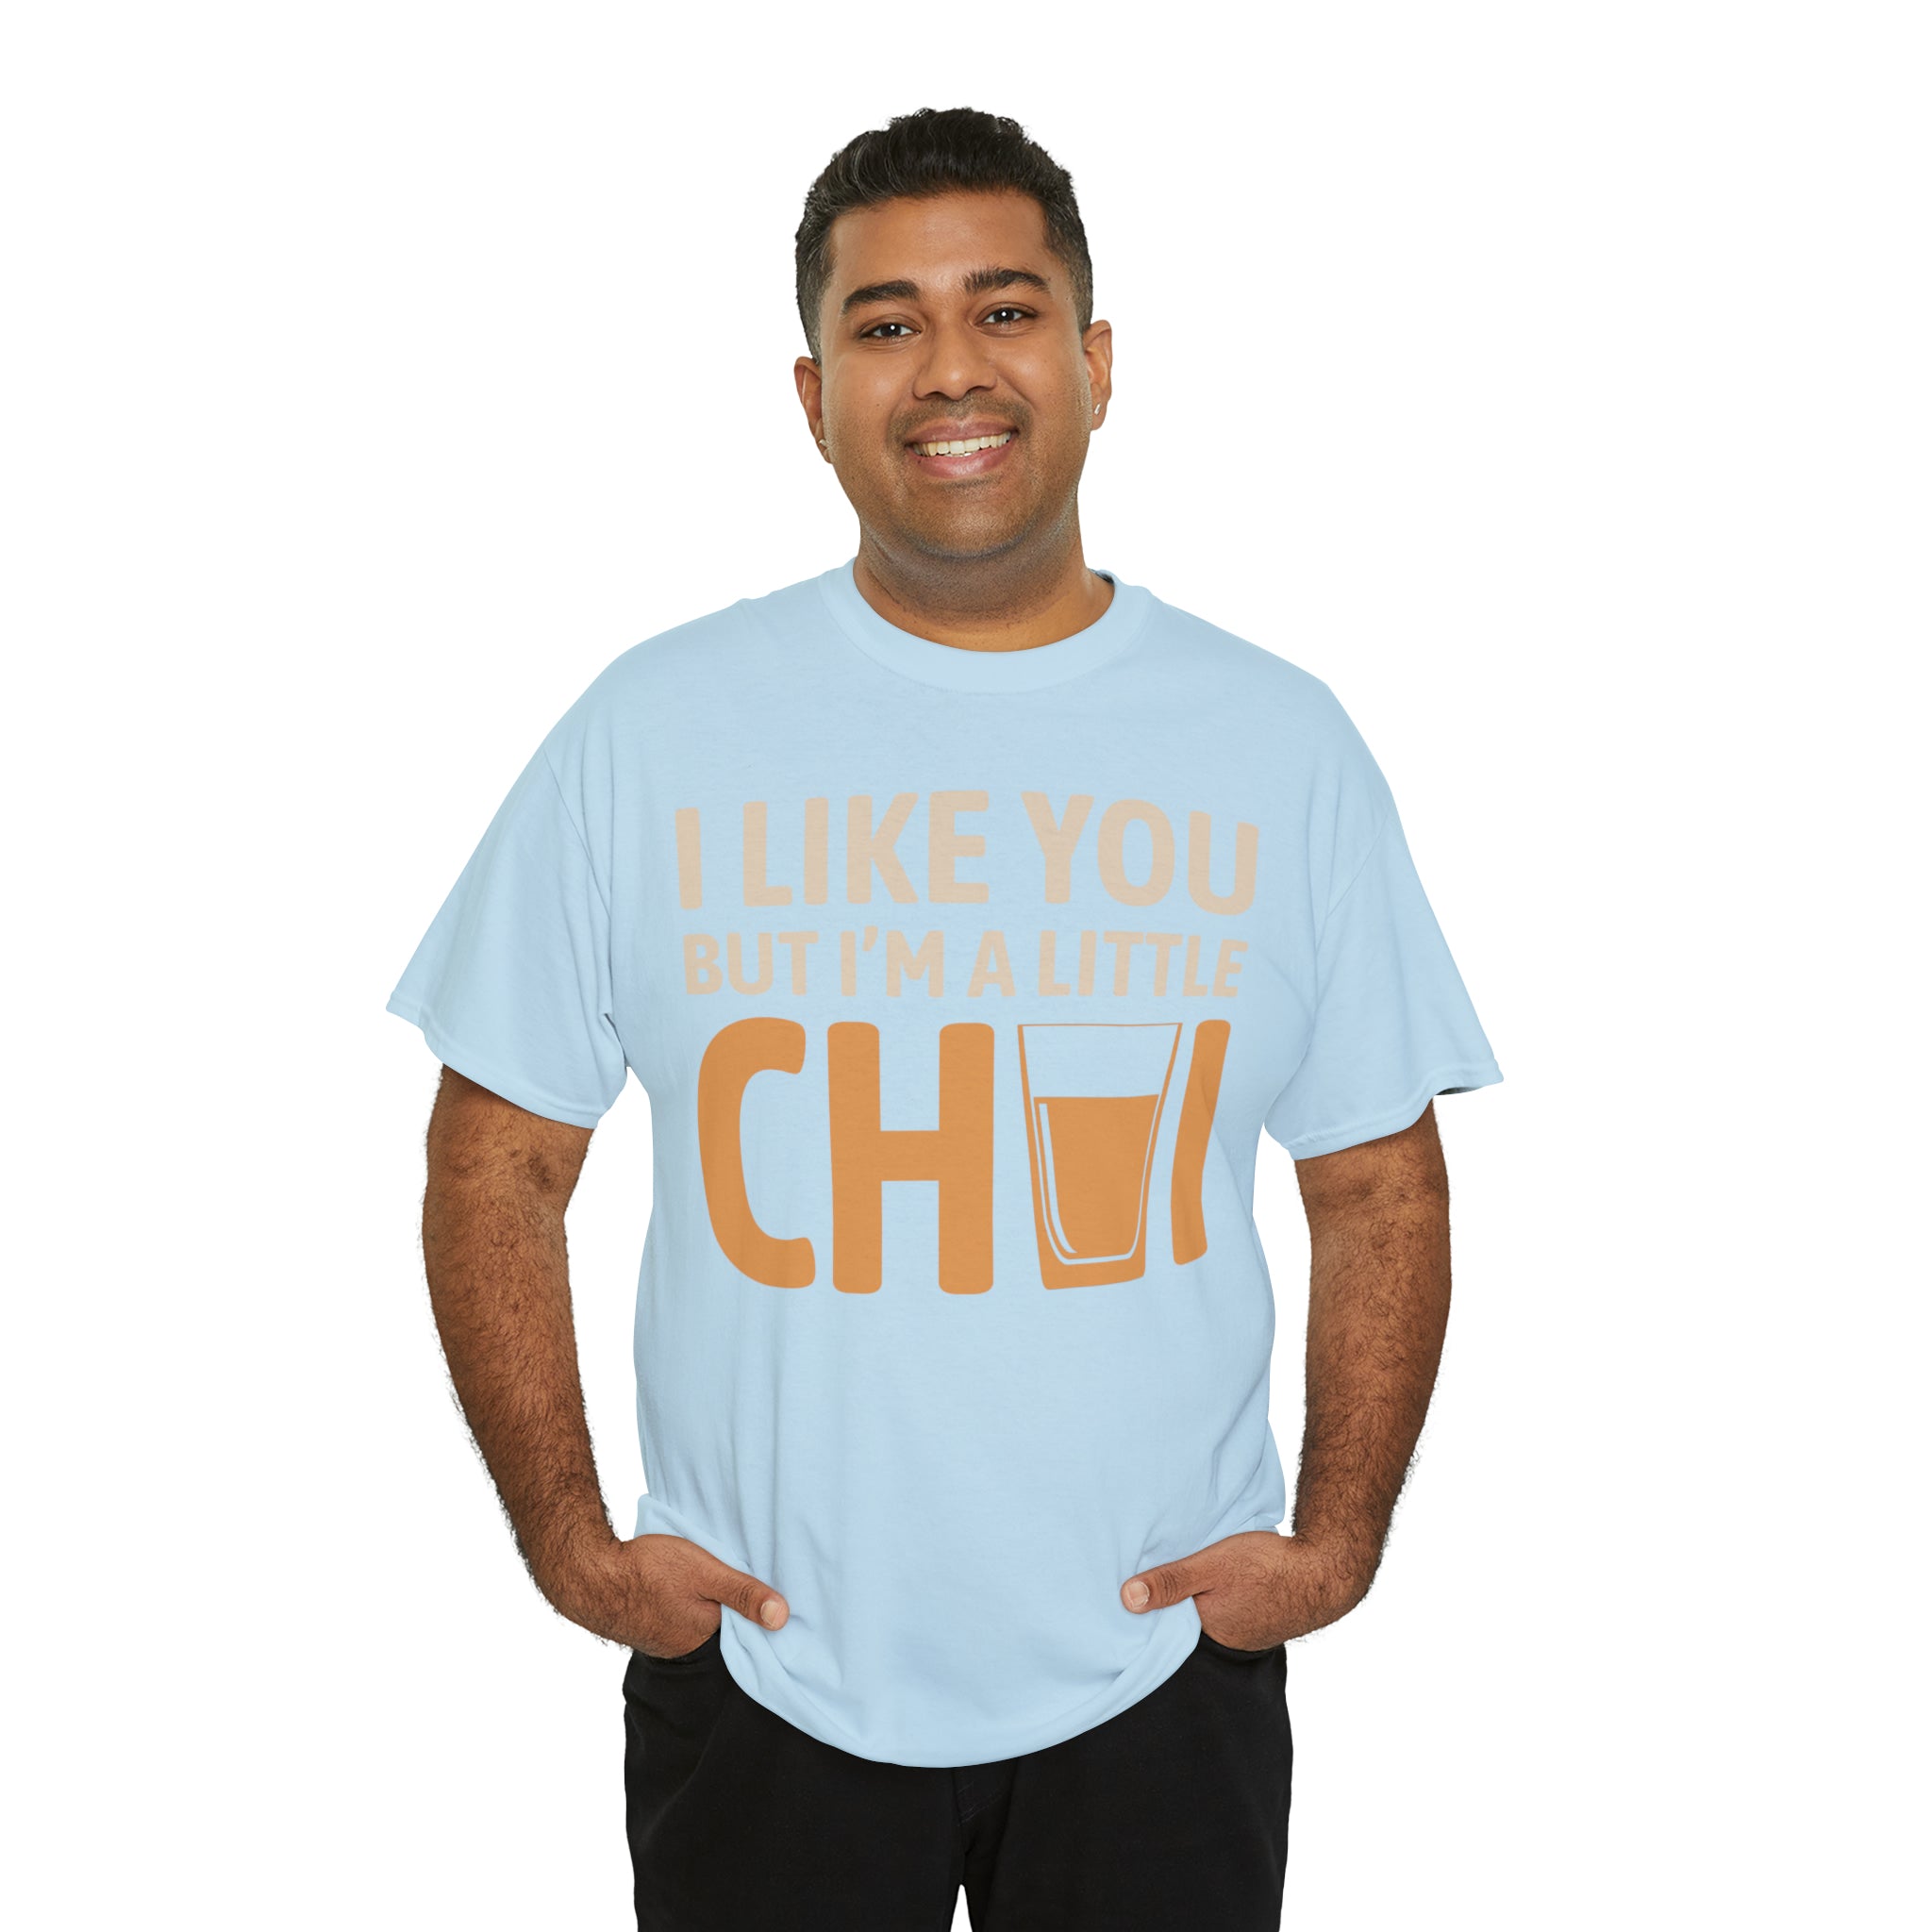 I'm Like You But I'm A Little Chai T-Shirt Designs by C&C